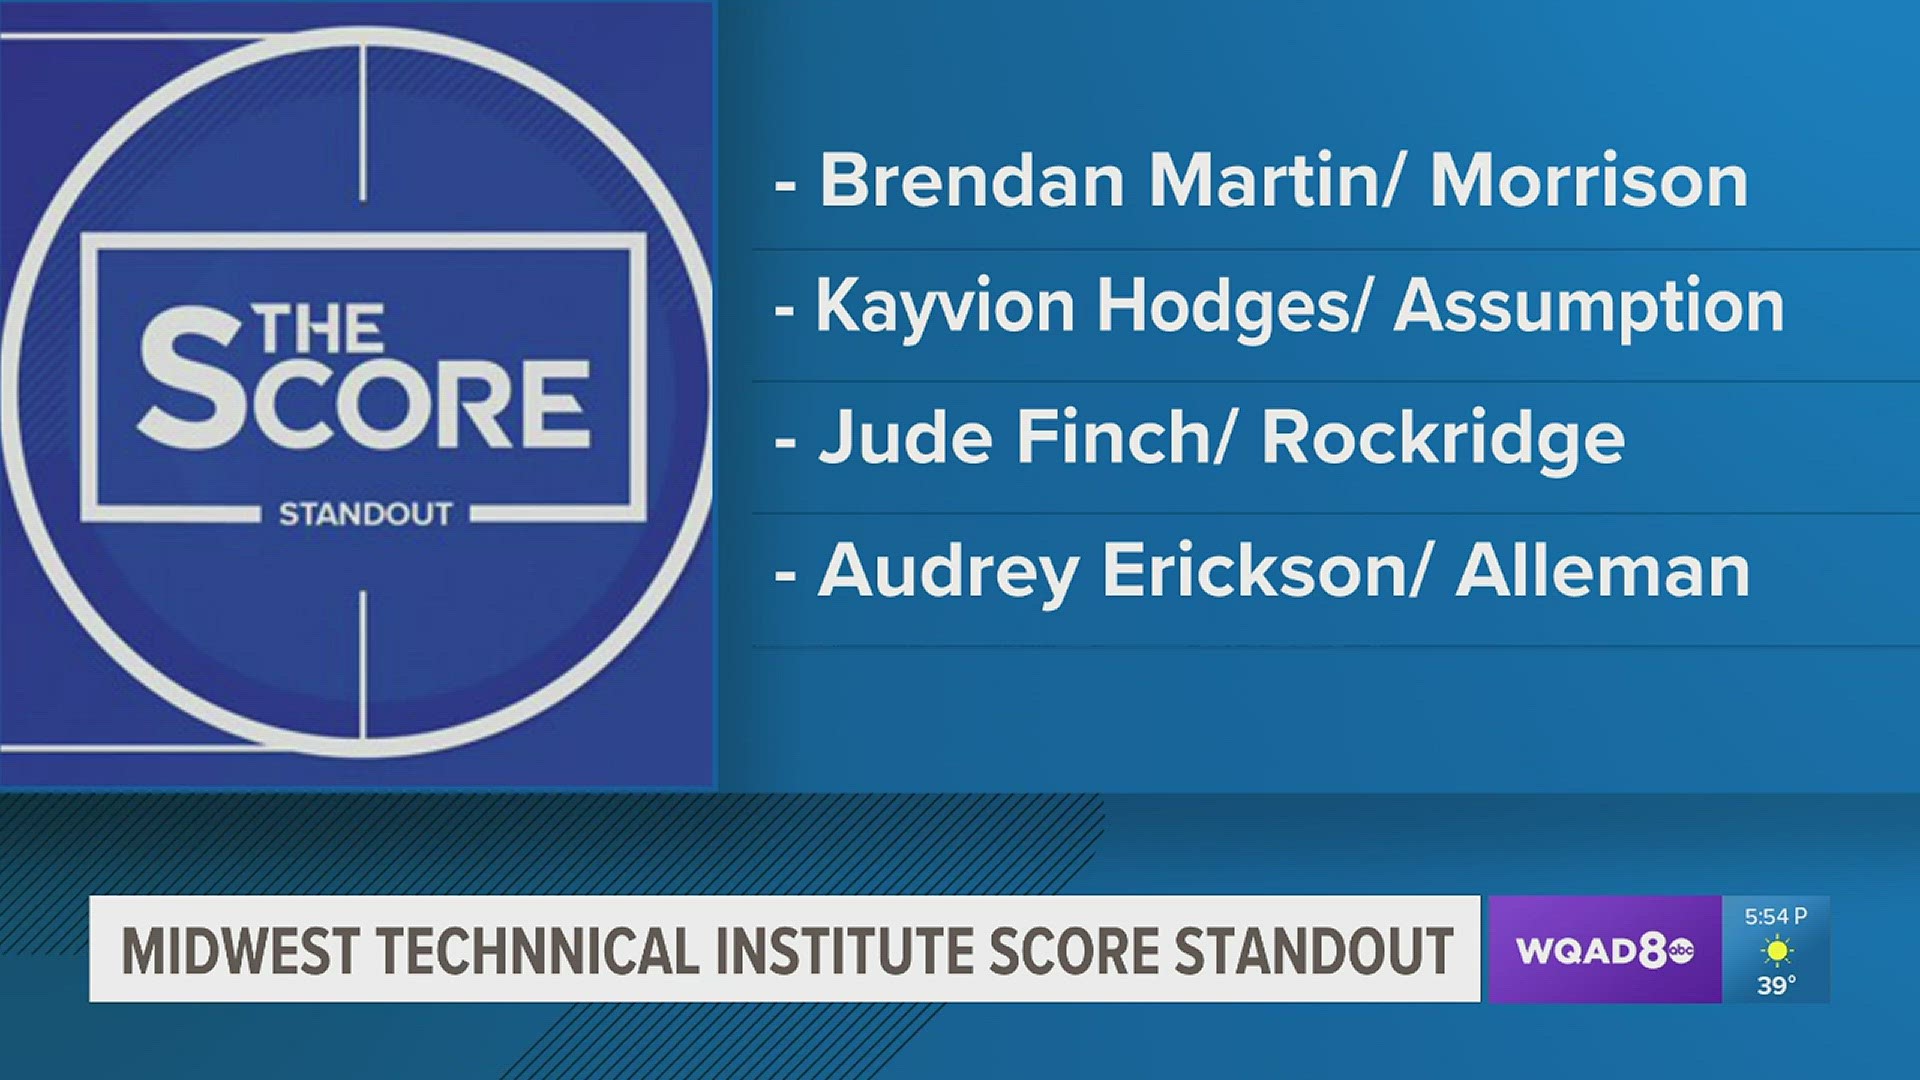 Vote for this weeks Midwest Technical Institute Score Standout Nominees. Poll is open until Wednesday at Noon.